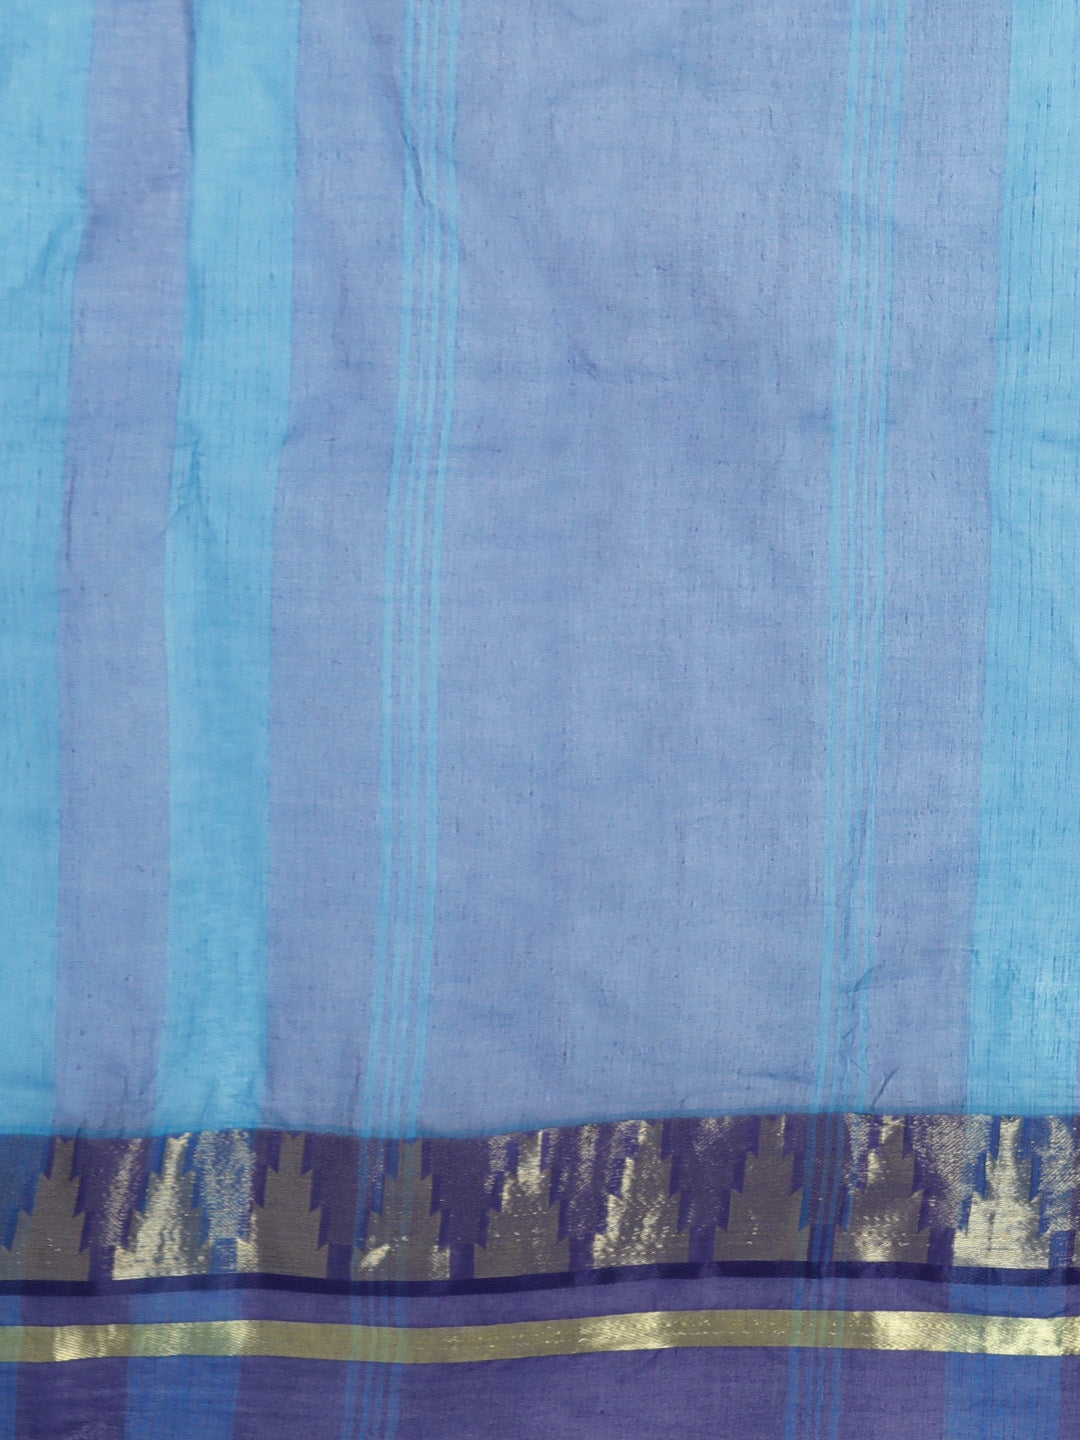 Blue Tant Woven Design Saree Without Blouse Piece DUTASA054 DUTASA054-Saree-Kalakari India-DUTASA054-Geographical Indication, Hand Crafted, Heritage Prints, Natural Dyes, Sarees, Silk Cotton, Sustainable Fabrics, Taant, Tant, West Bengal, Woven-[Linen,Ethnic,wear,Fashionista,Handloom,Handicraft,Indigo,blockprint,block,print,Cotton,Chanderi,Blue, latest,classy,party,bollywood,trendy,summer,style,traditional,formal,elegant,unique,style,hand,block,print, dabu,booti,gift,present,glamorous,affordable